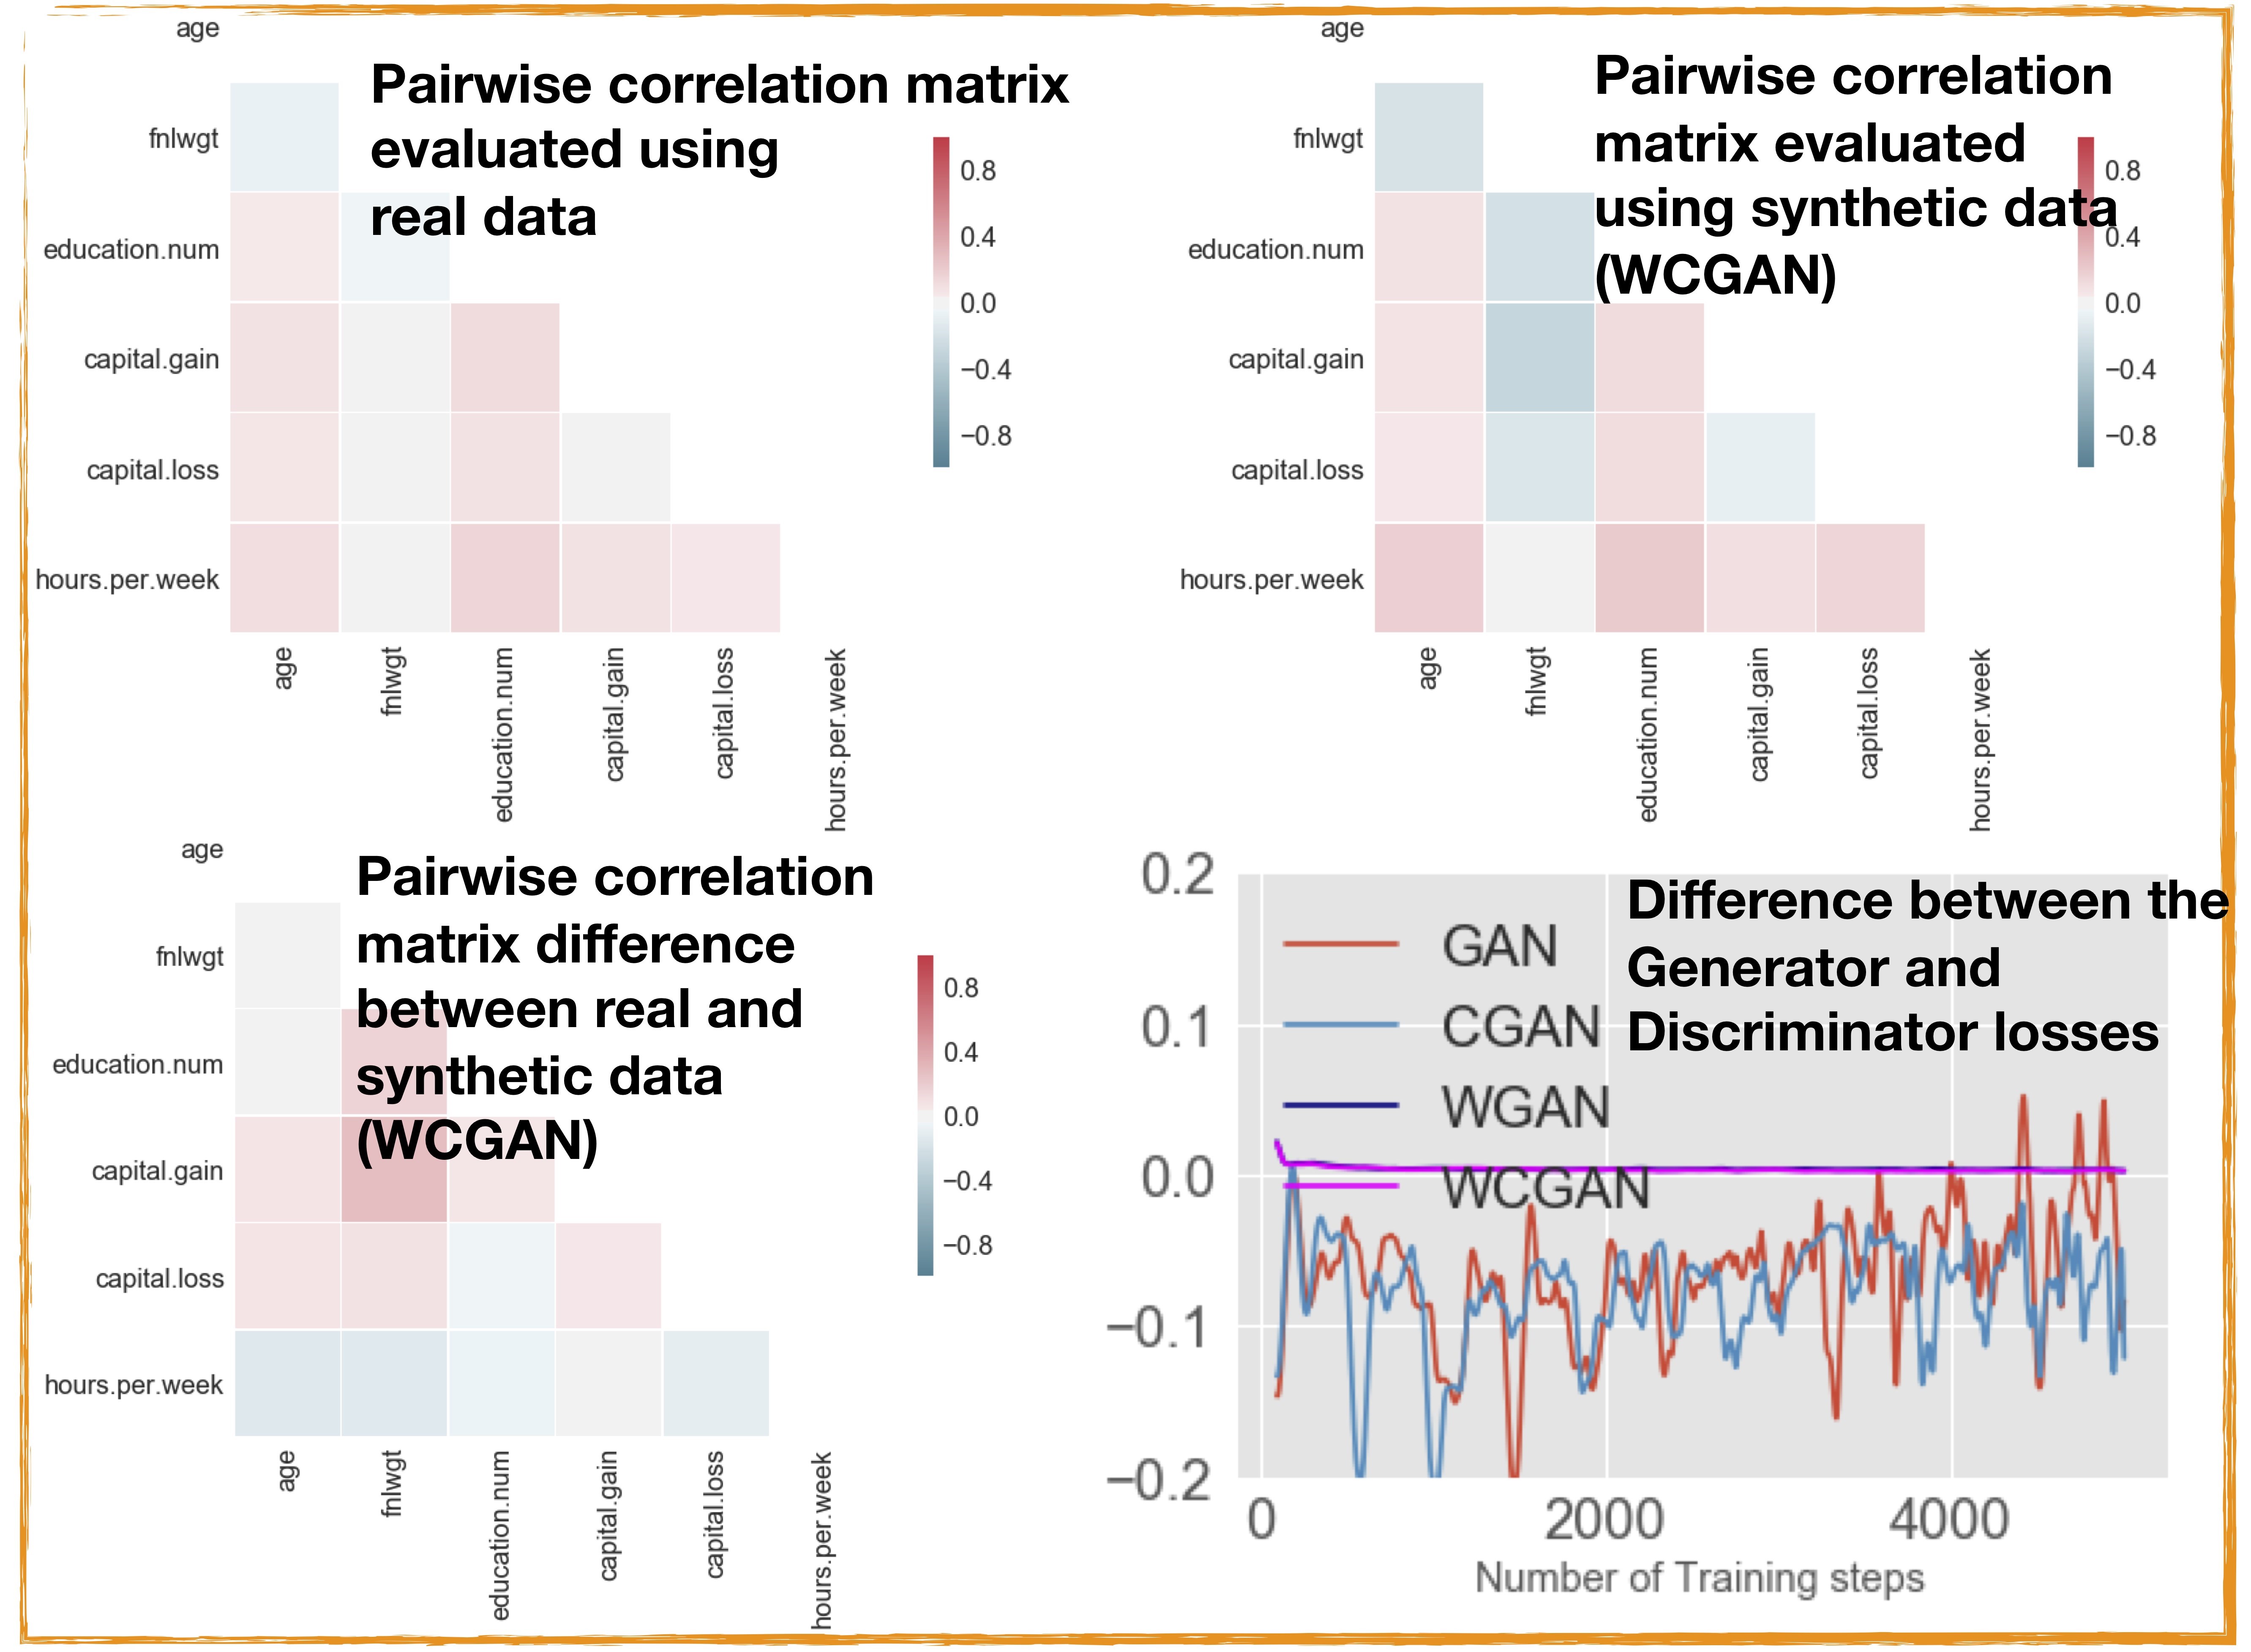 Pairwise correlation matrix evaluated using the real and synthetically generated datasets